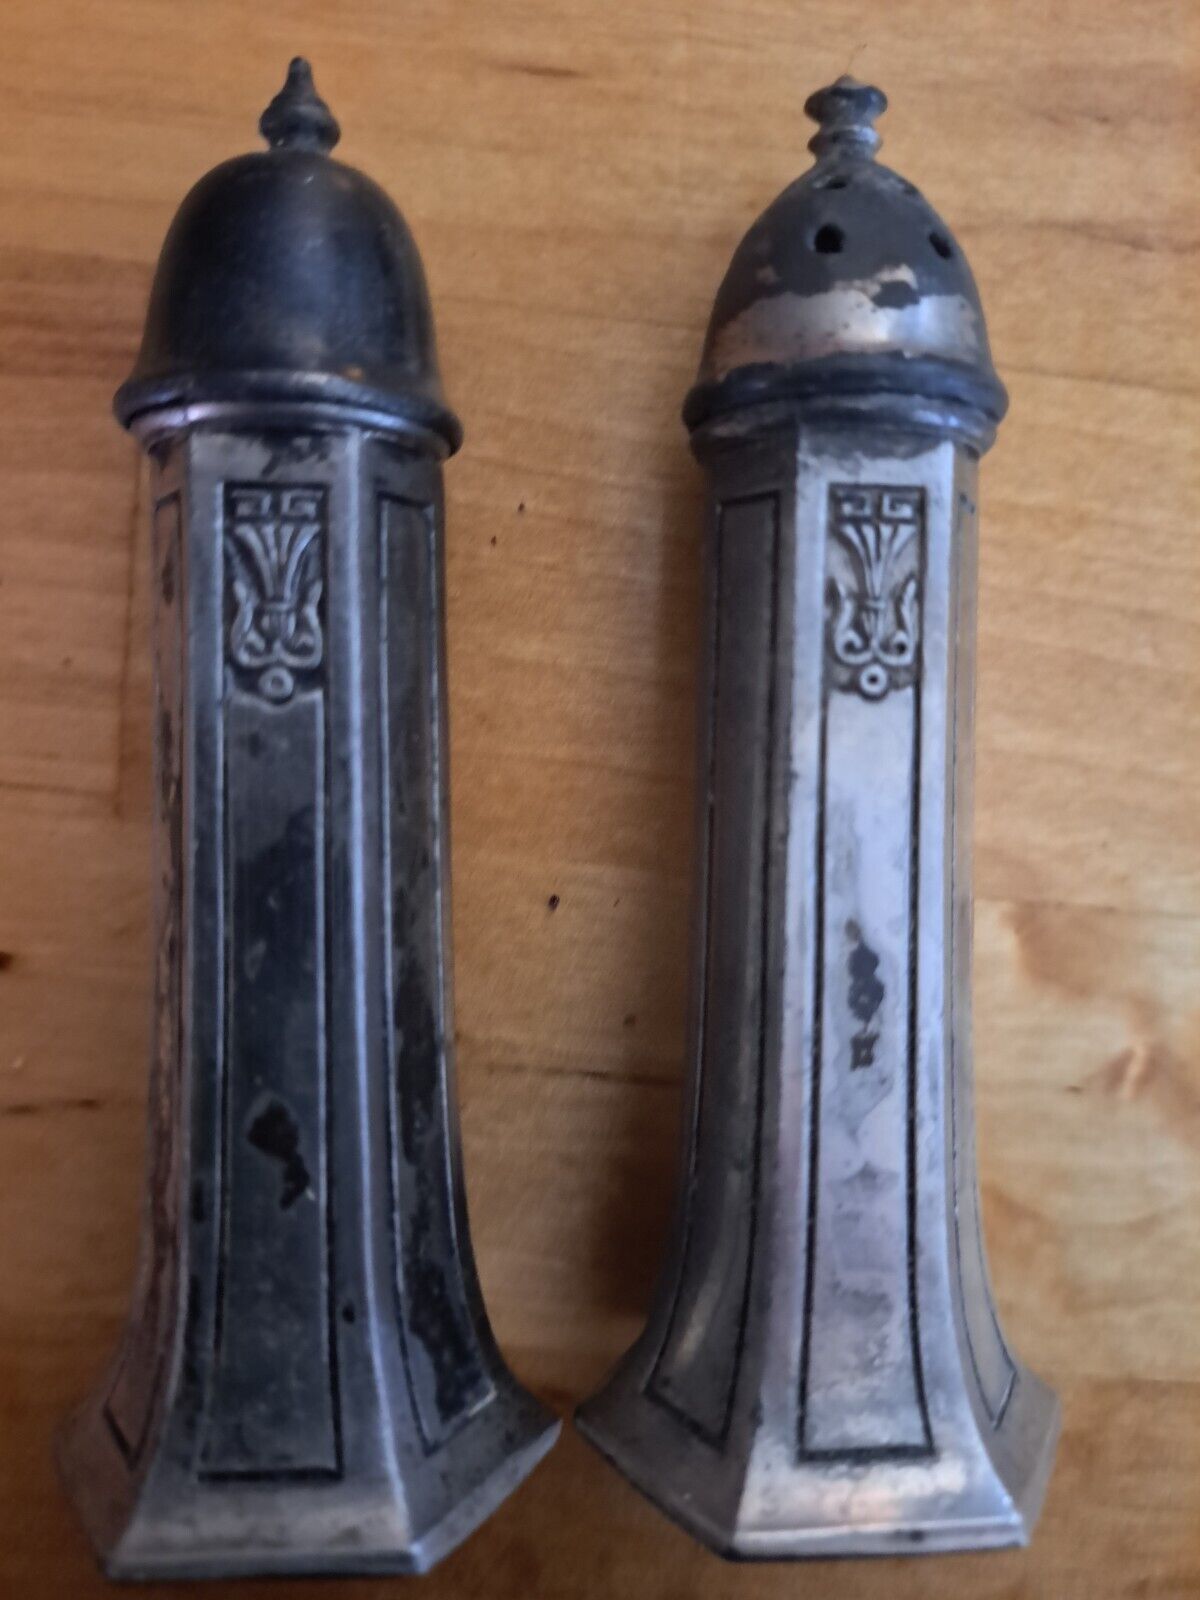 Antique Shakers. 1930s. Pic of a Quaker & \